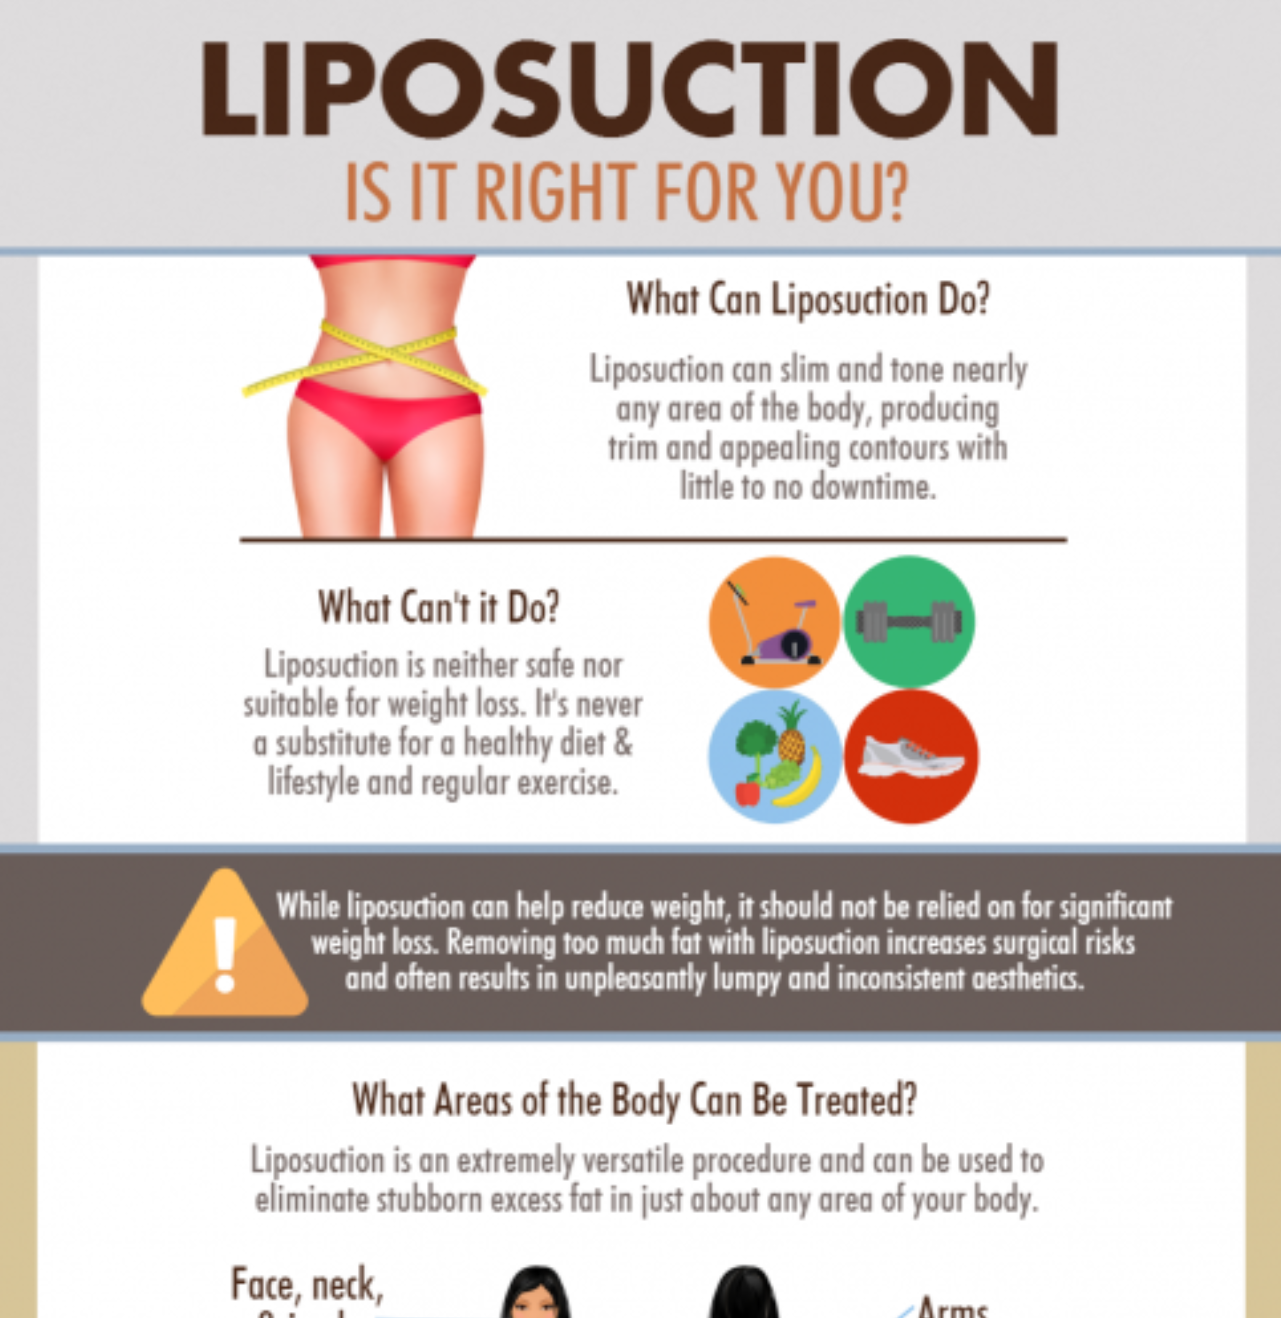 Liposuction - is it right for you? Infographic